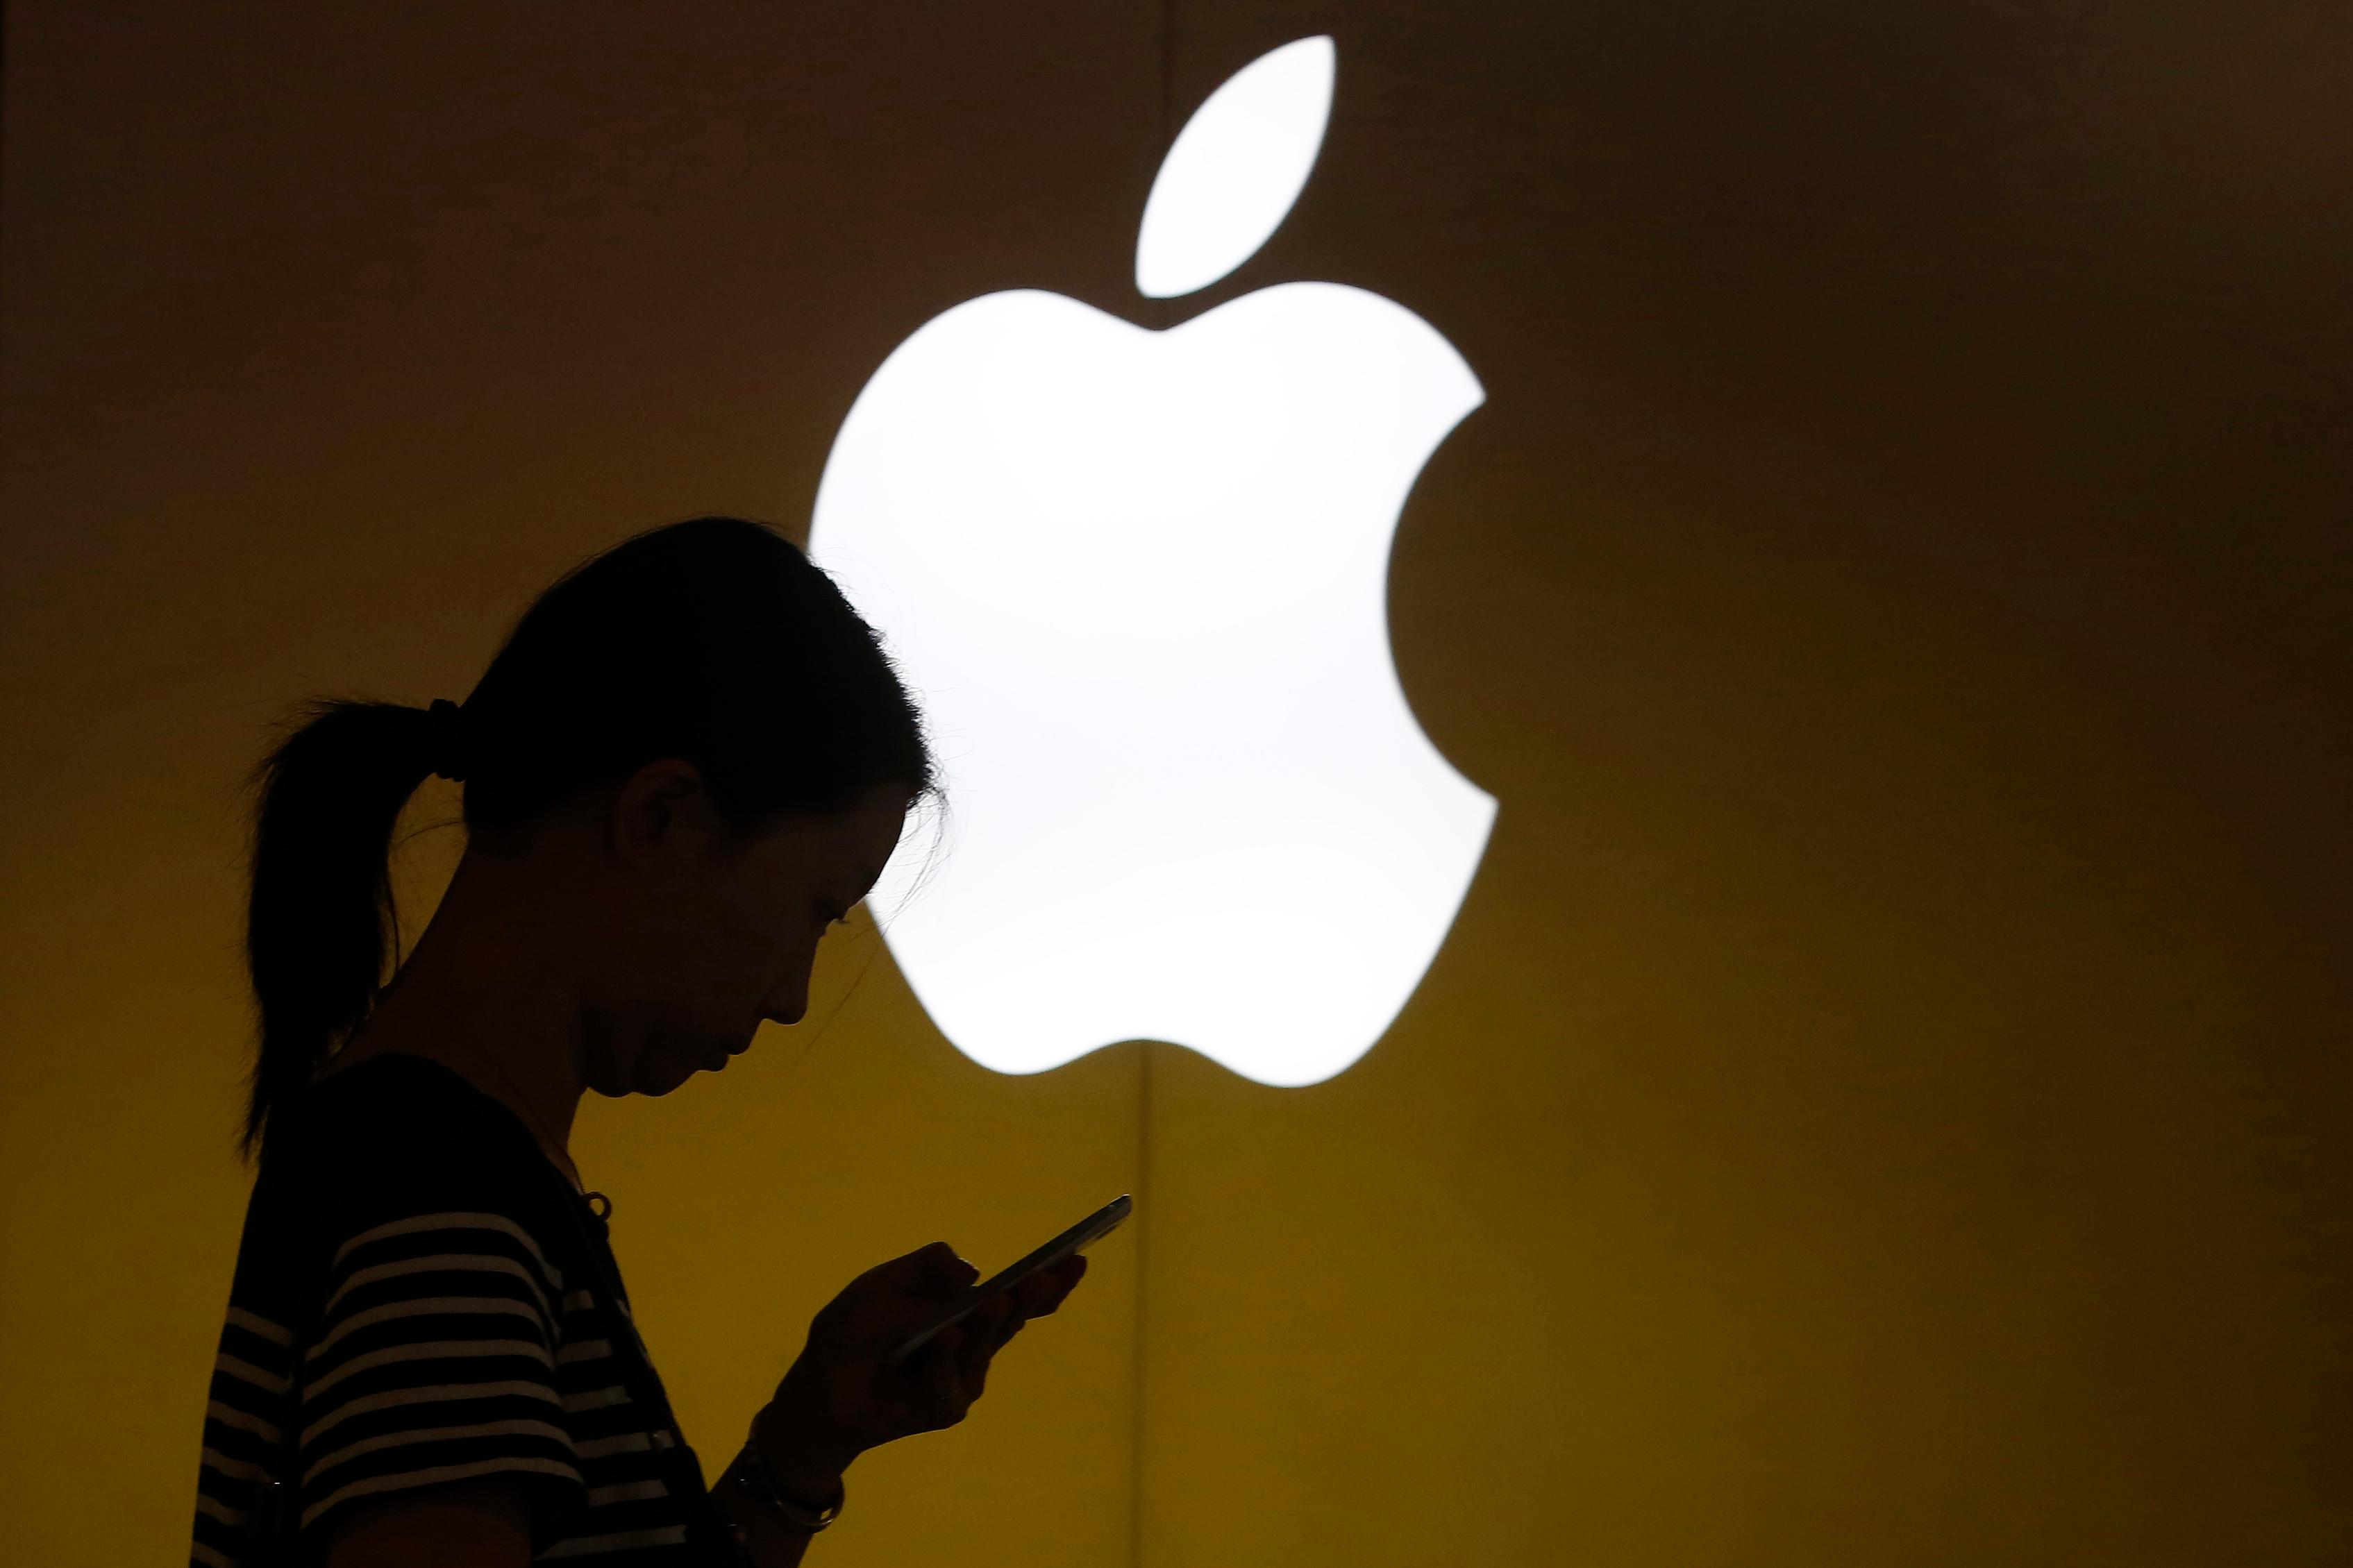 Apple faces $862M payout in patent lawsuit